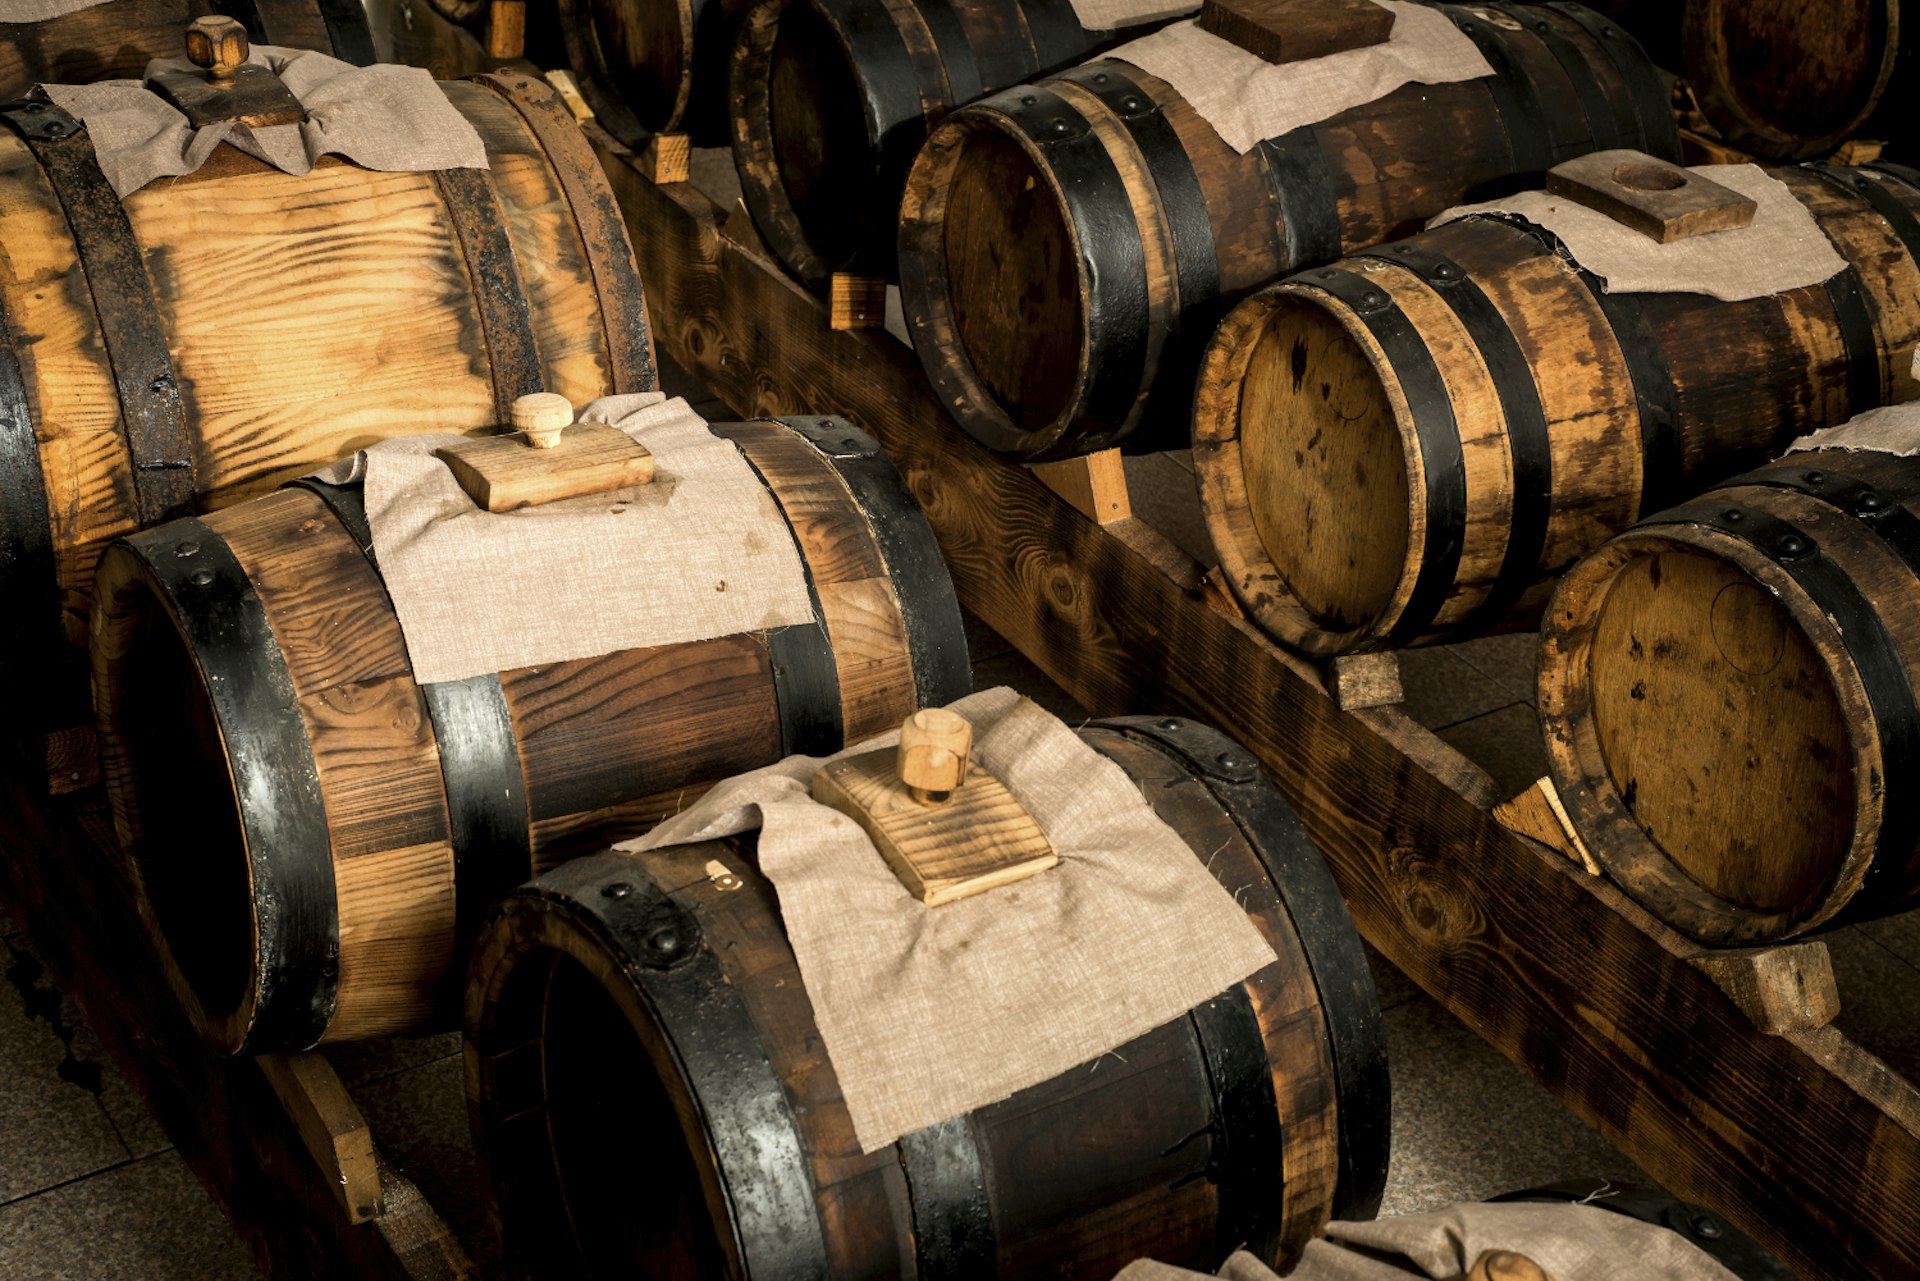 Traditional balsamic vinegar of Modena is left to ferment in wooden barrels for several years